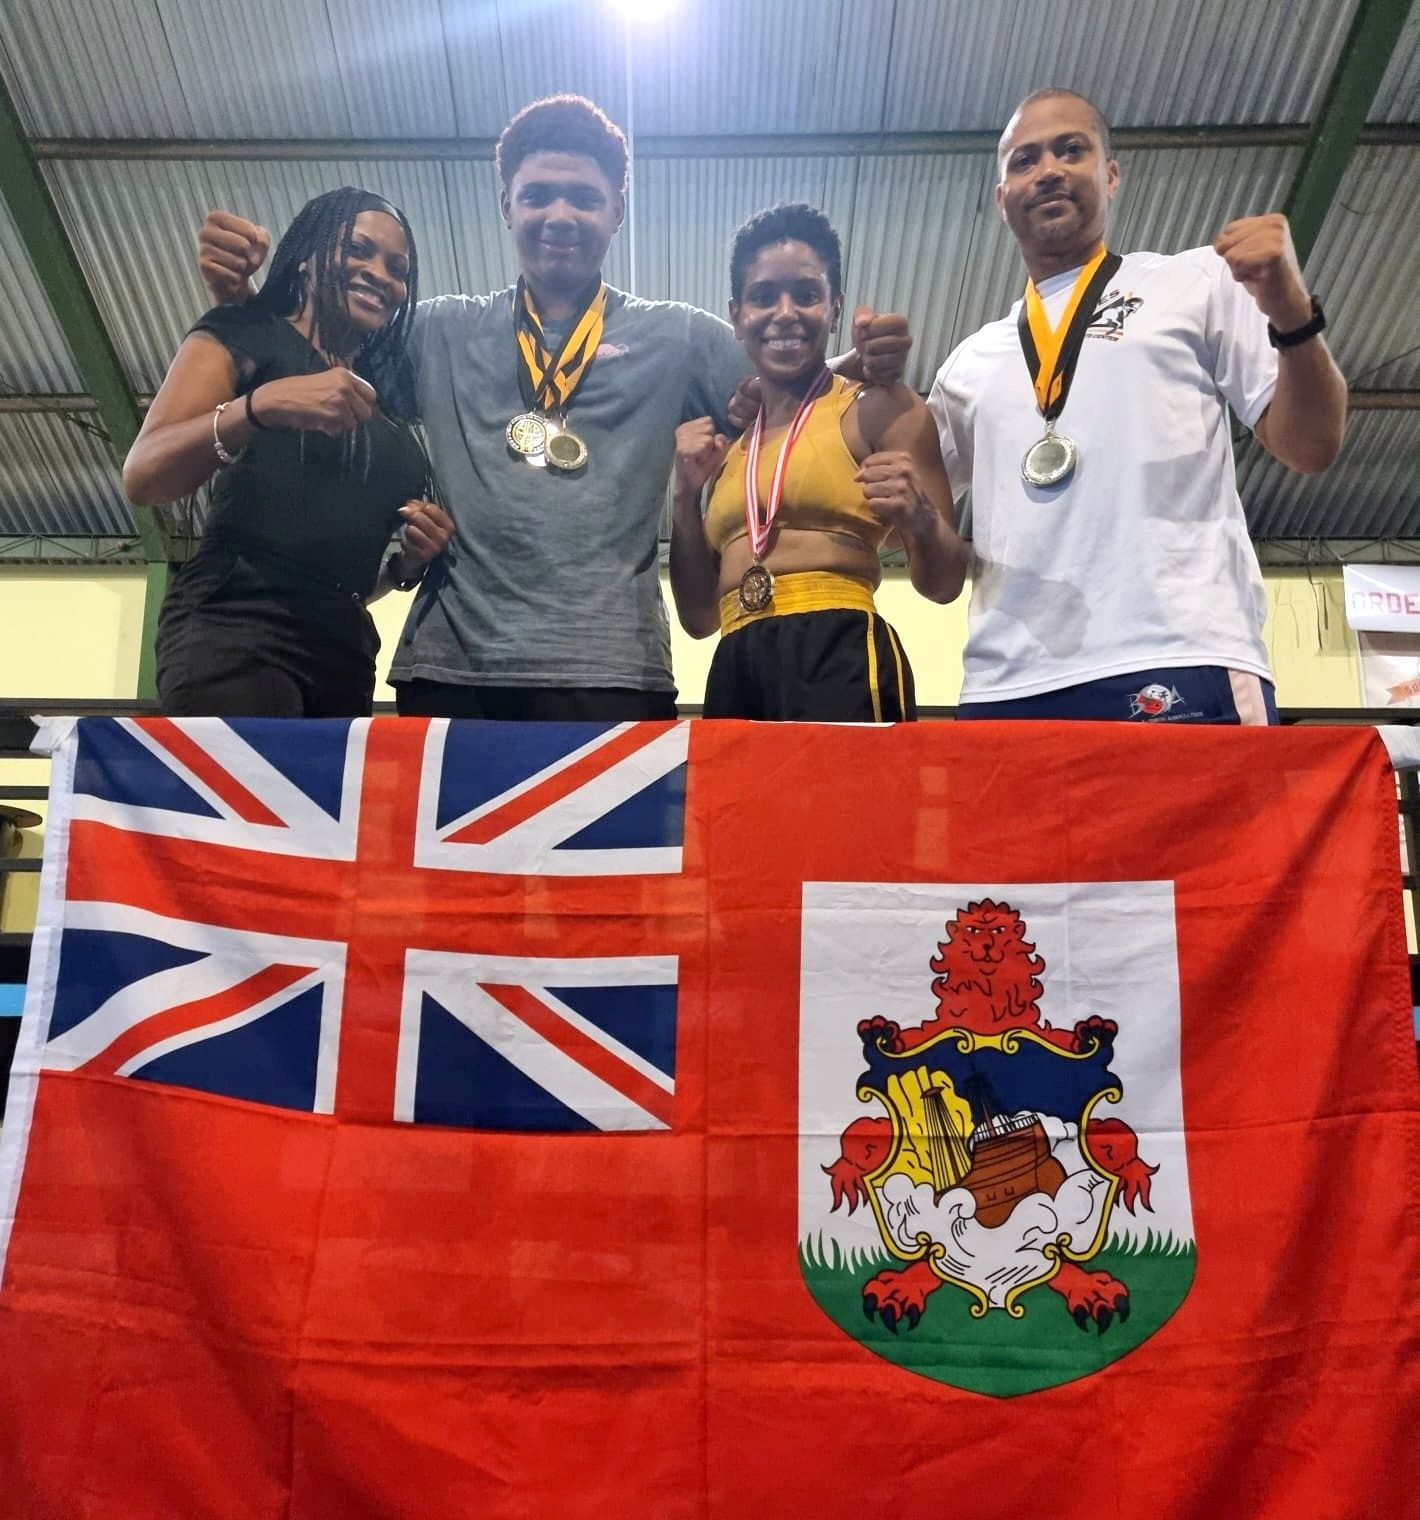 Bermuda Fighters Leave Indonesia with Medals (Athletics)